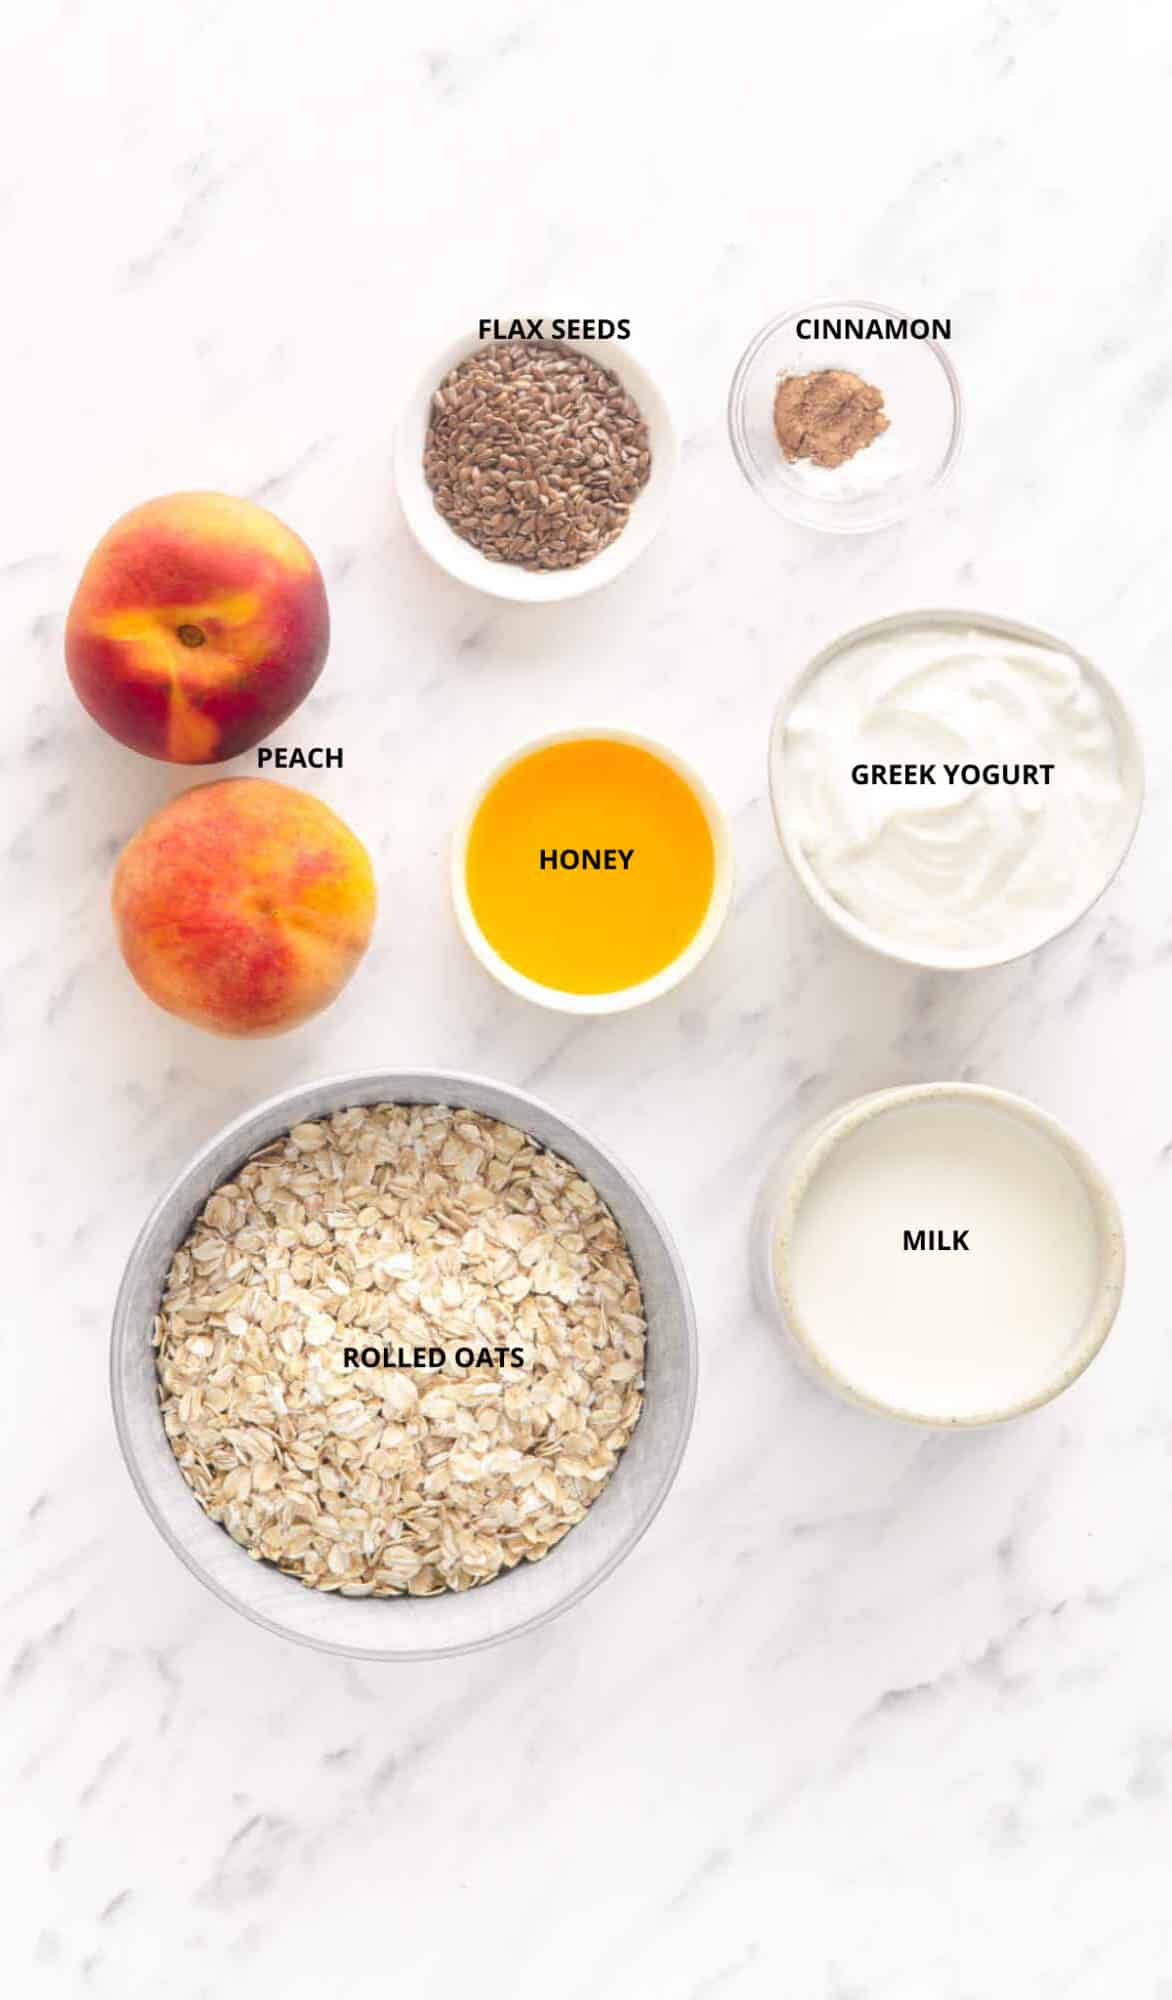 ingredients for rolled oats with yogurt, peach, cinnamon and flax seeds.